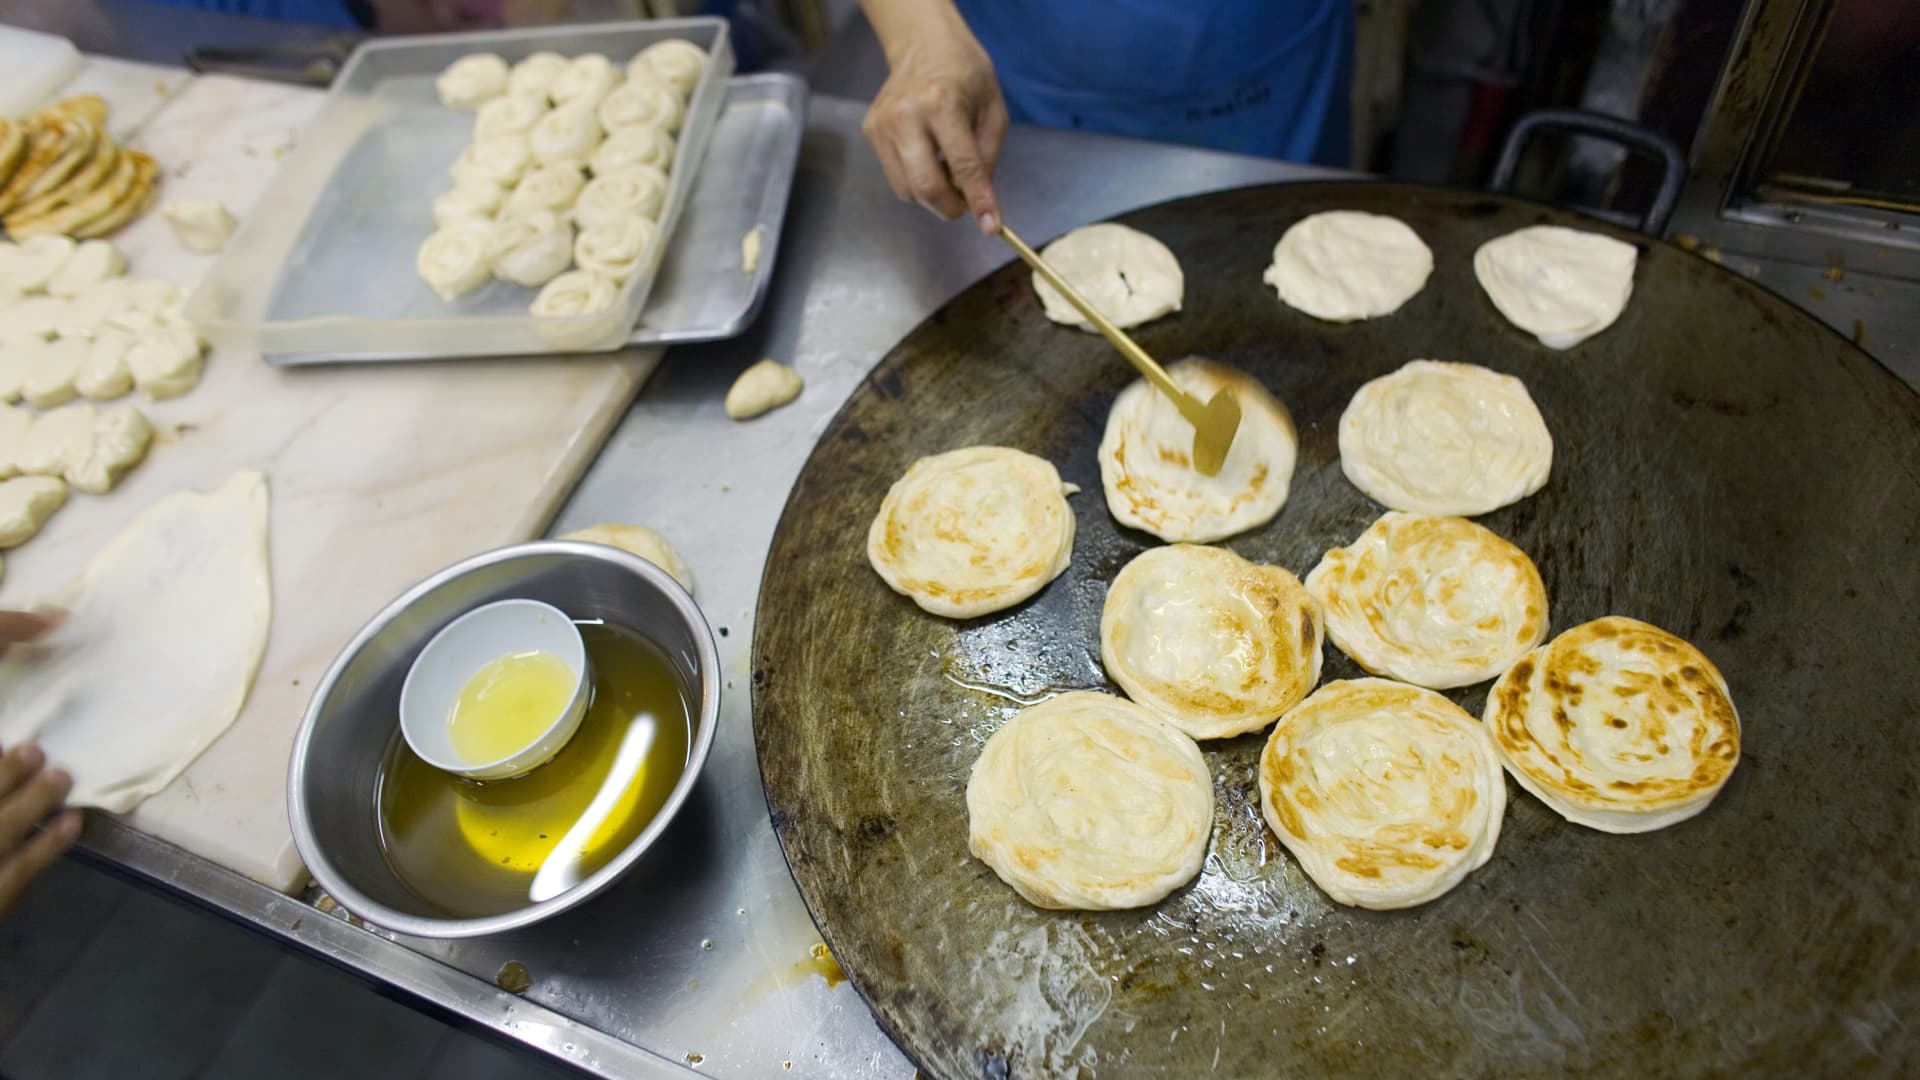 Roti Mataba serves buttery, fried roti flatbread, which comes stuffed, served with curry or slathered with sweetened condensed milk and sugar.